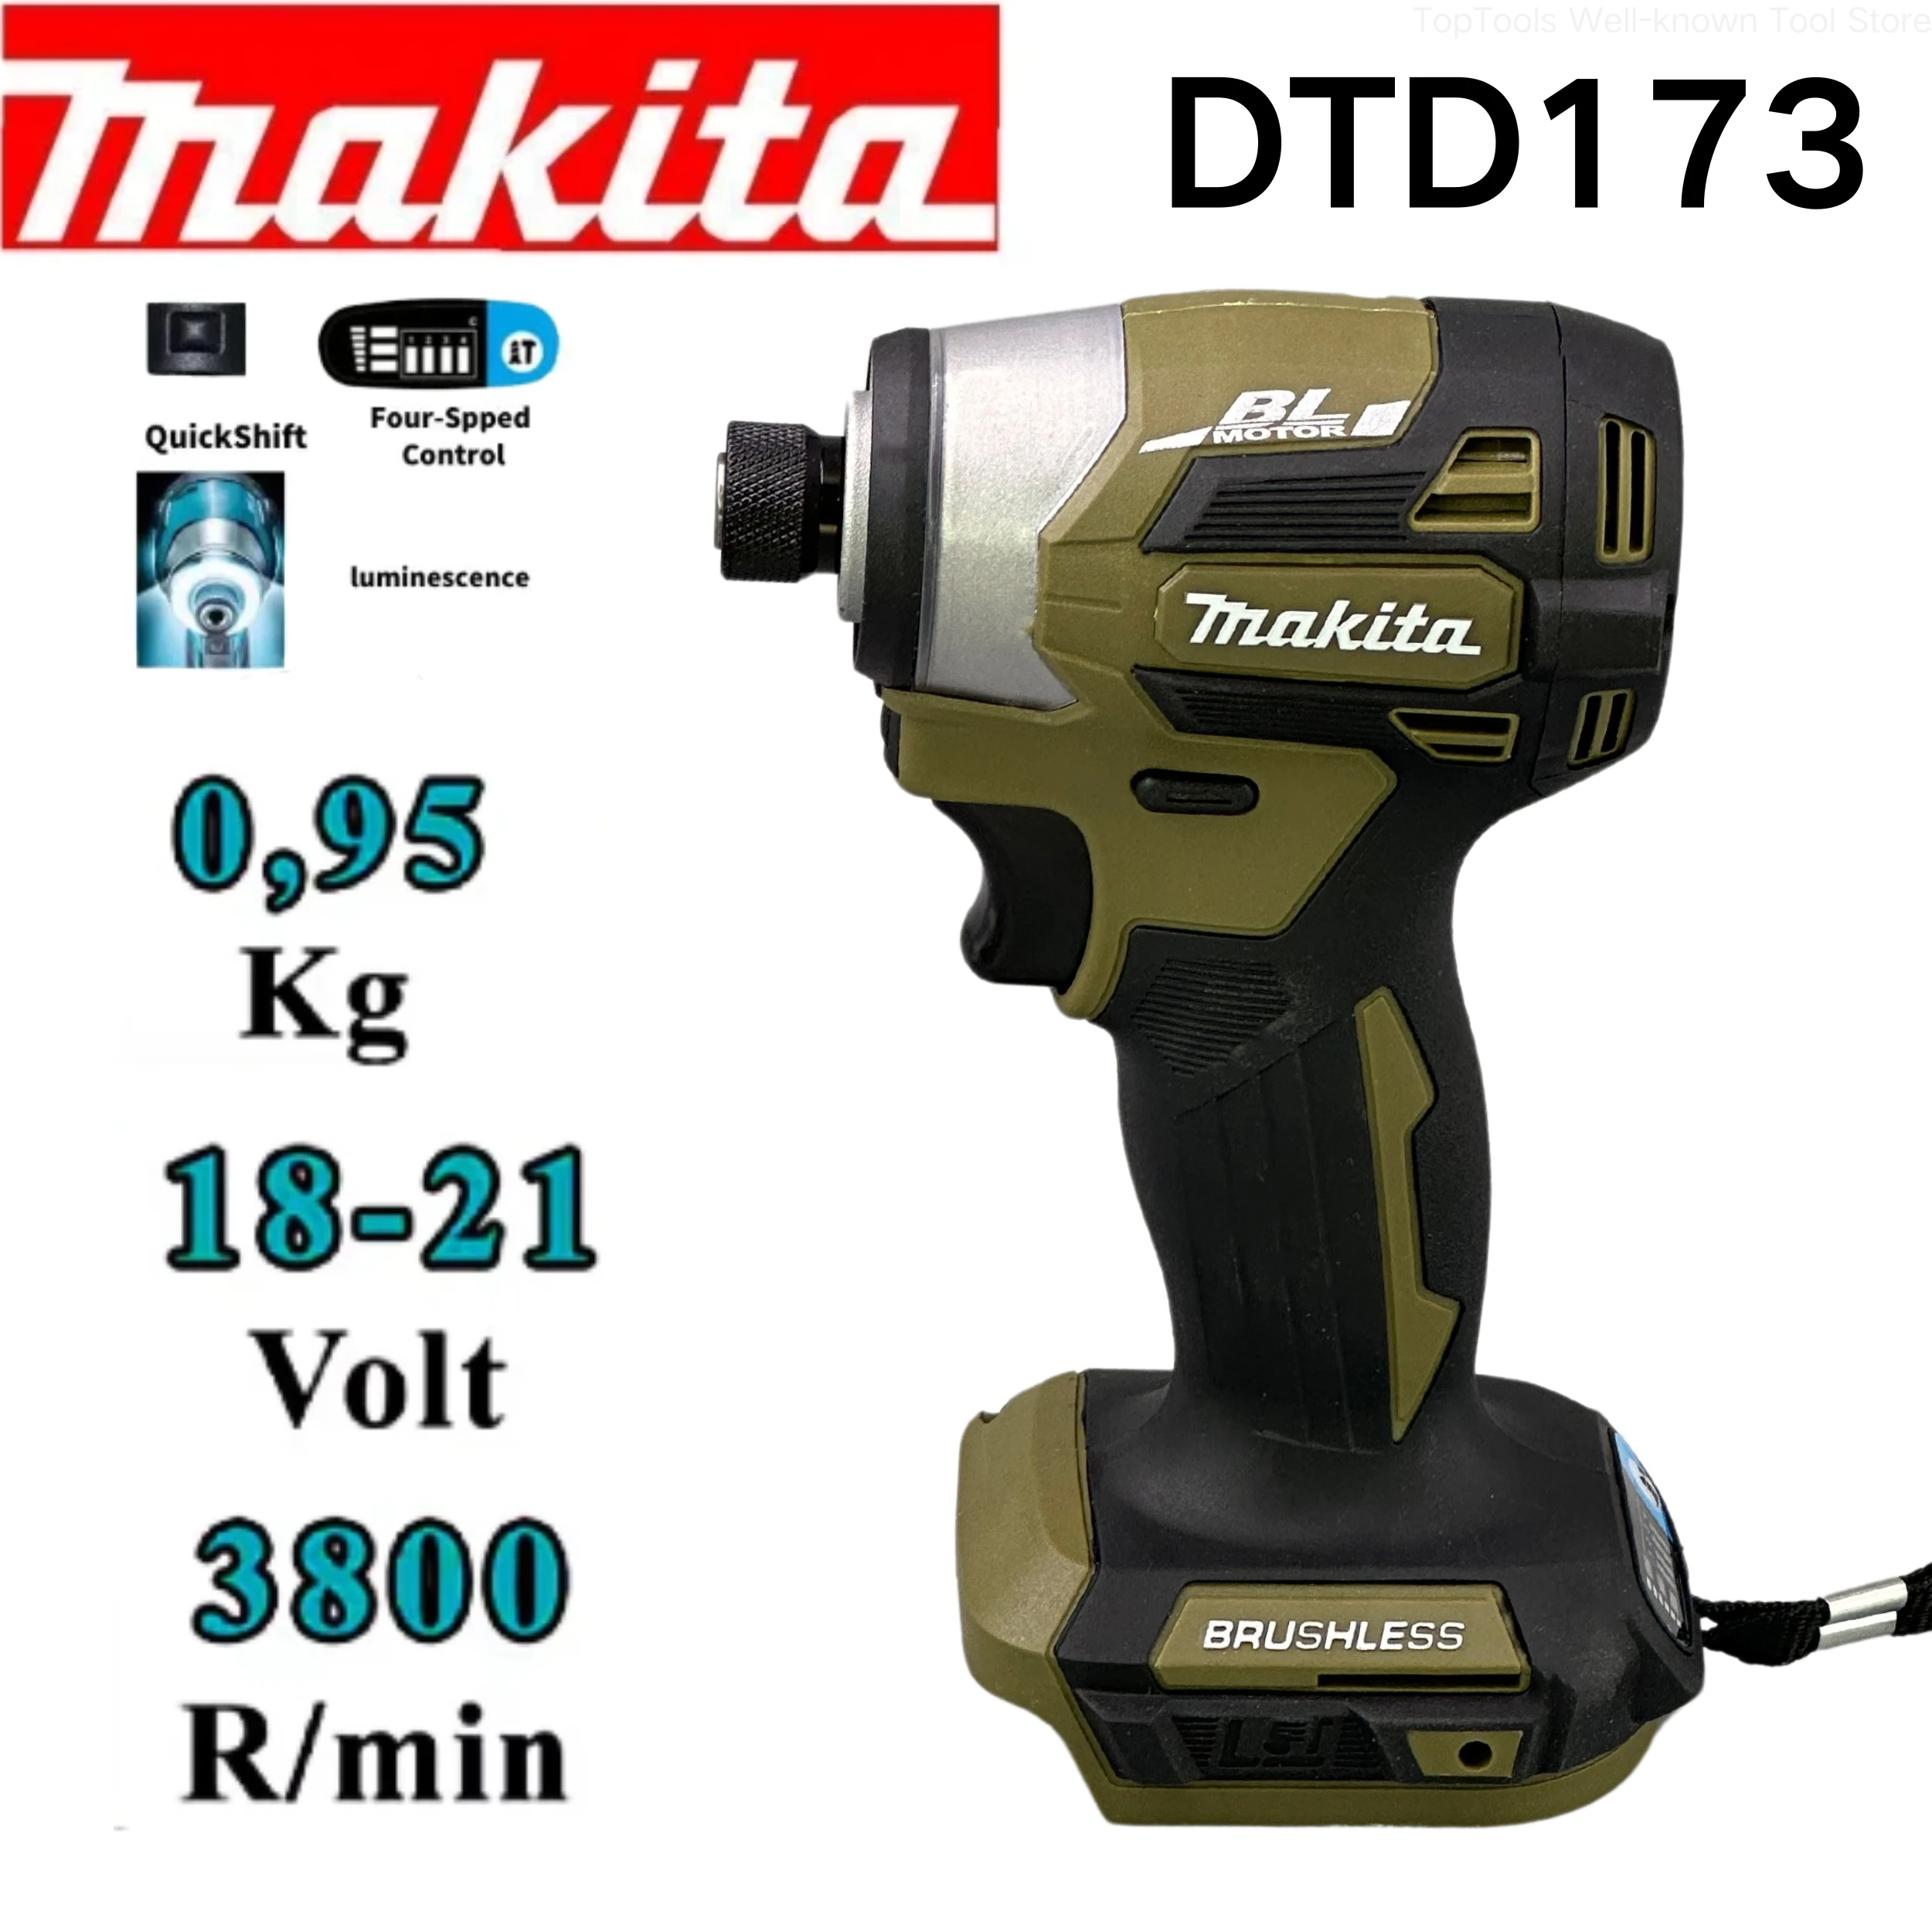 

Makita DTD173 Japan Imported Domestic Version Brushless 18v Lithium Impact Driver Power Tool Multi-function Tool